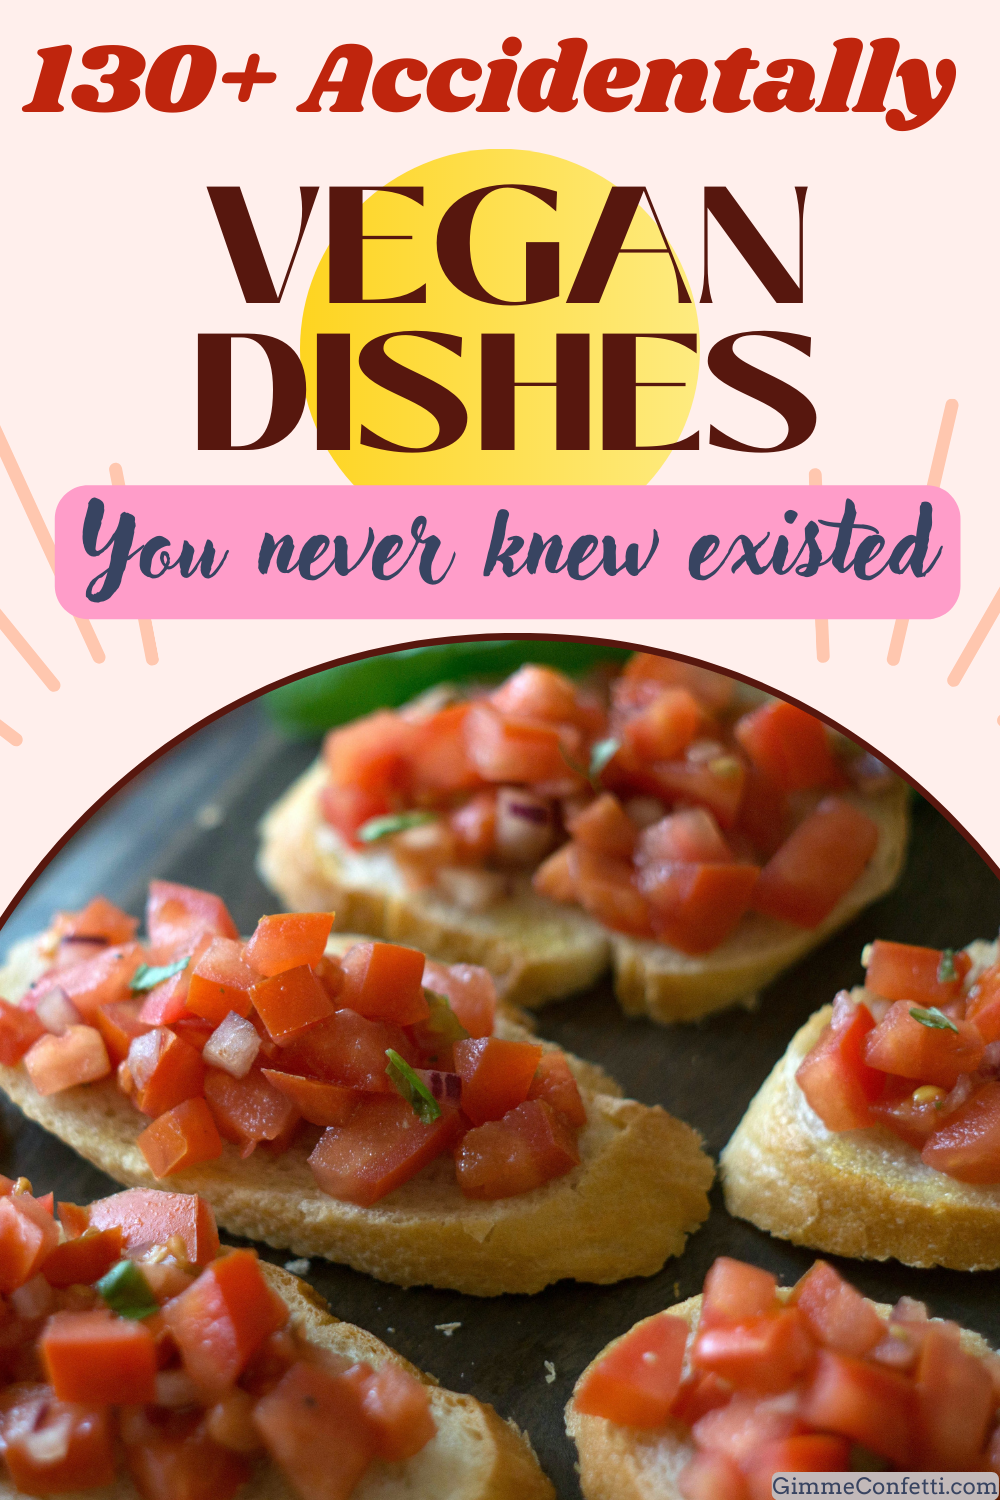 130+ Surprisingly Popular Traditional Vegan Dishes from Around the World You Must Try (that don’t need to be veganized)